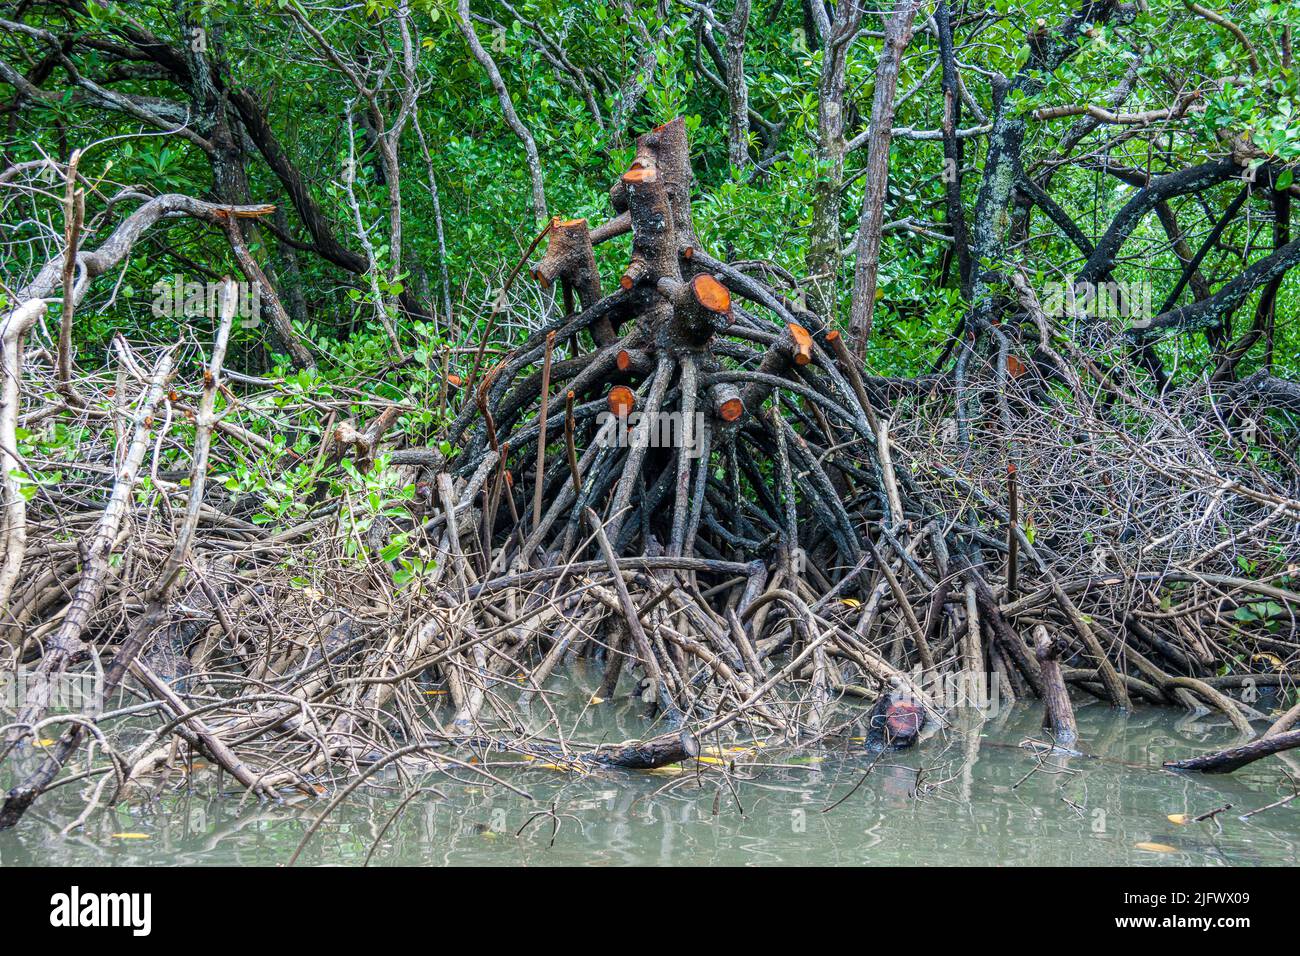 A view of mangrove trees cut with a chainsaw off the island of Yap, Micronesia. Stock Photo